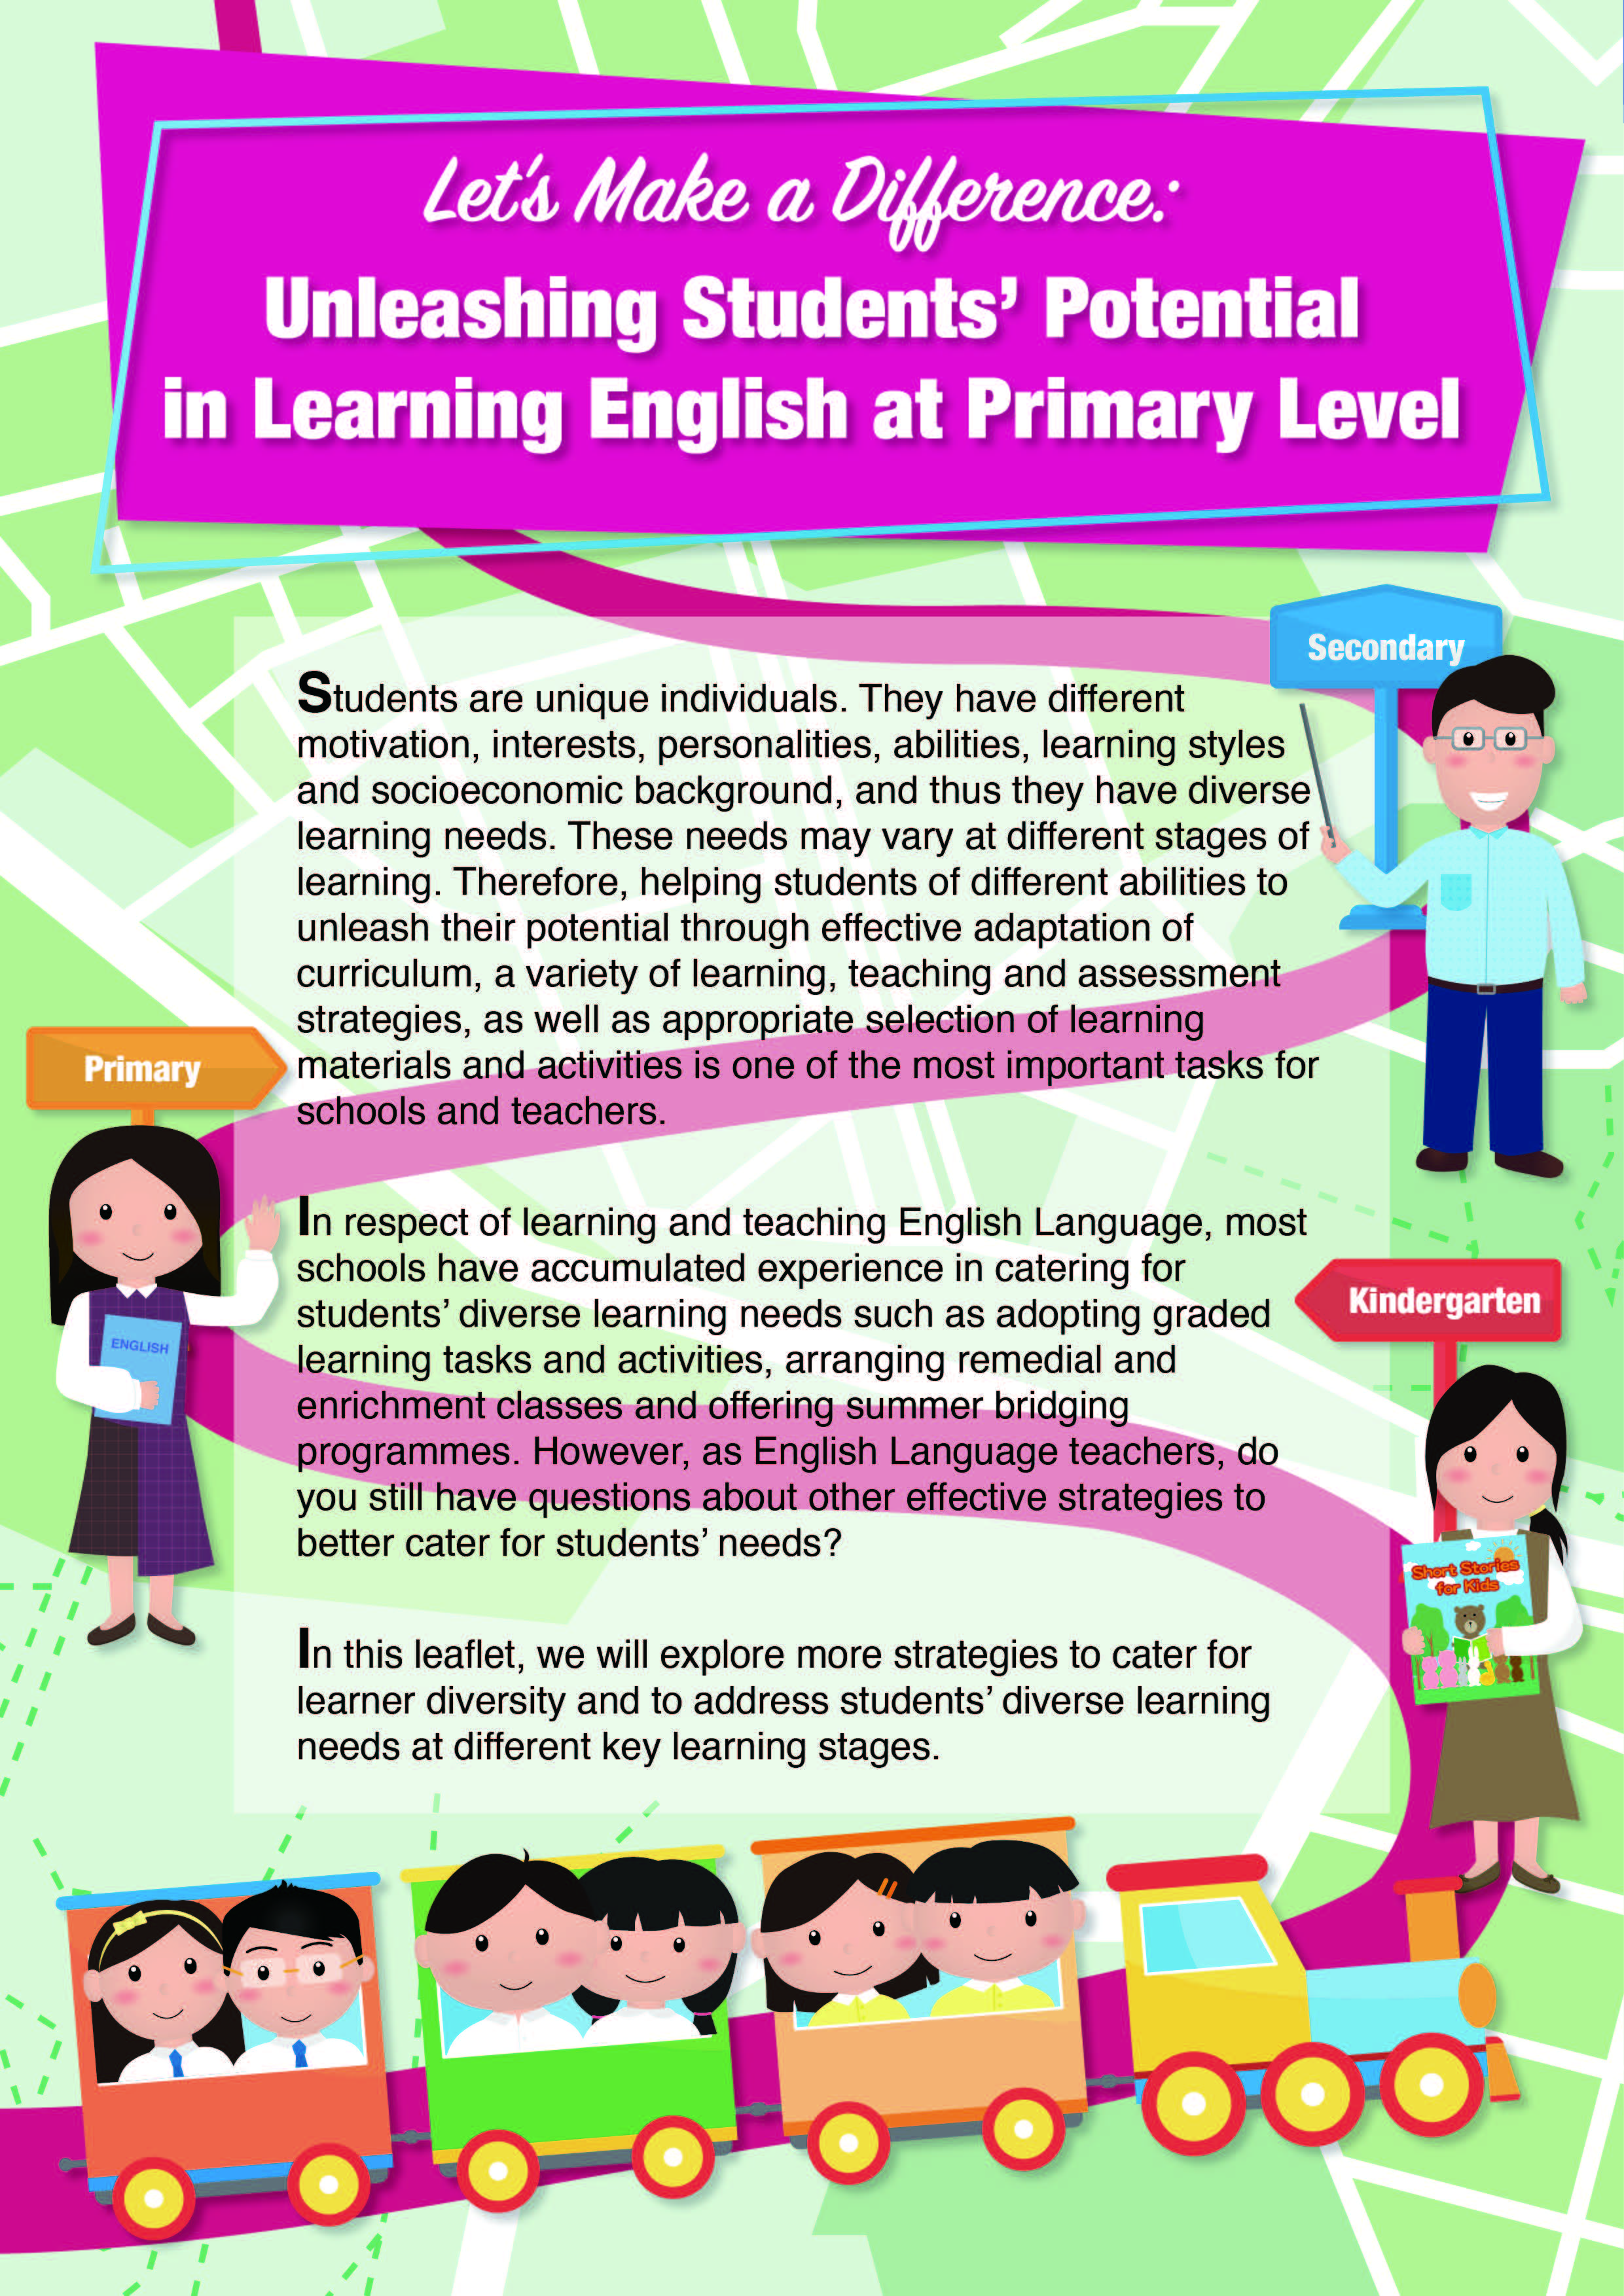 Let's Make a Difference: Unleashing Students' Potential in Learning English at Primary Level